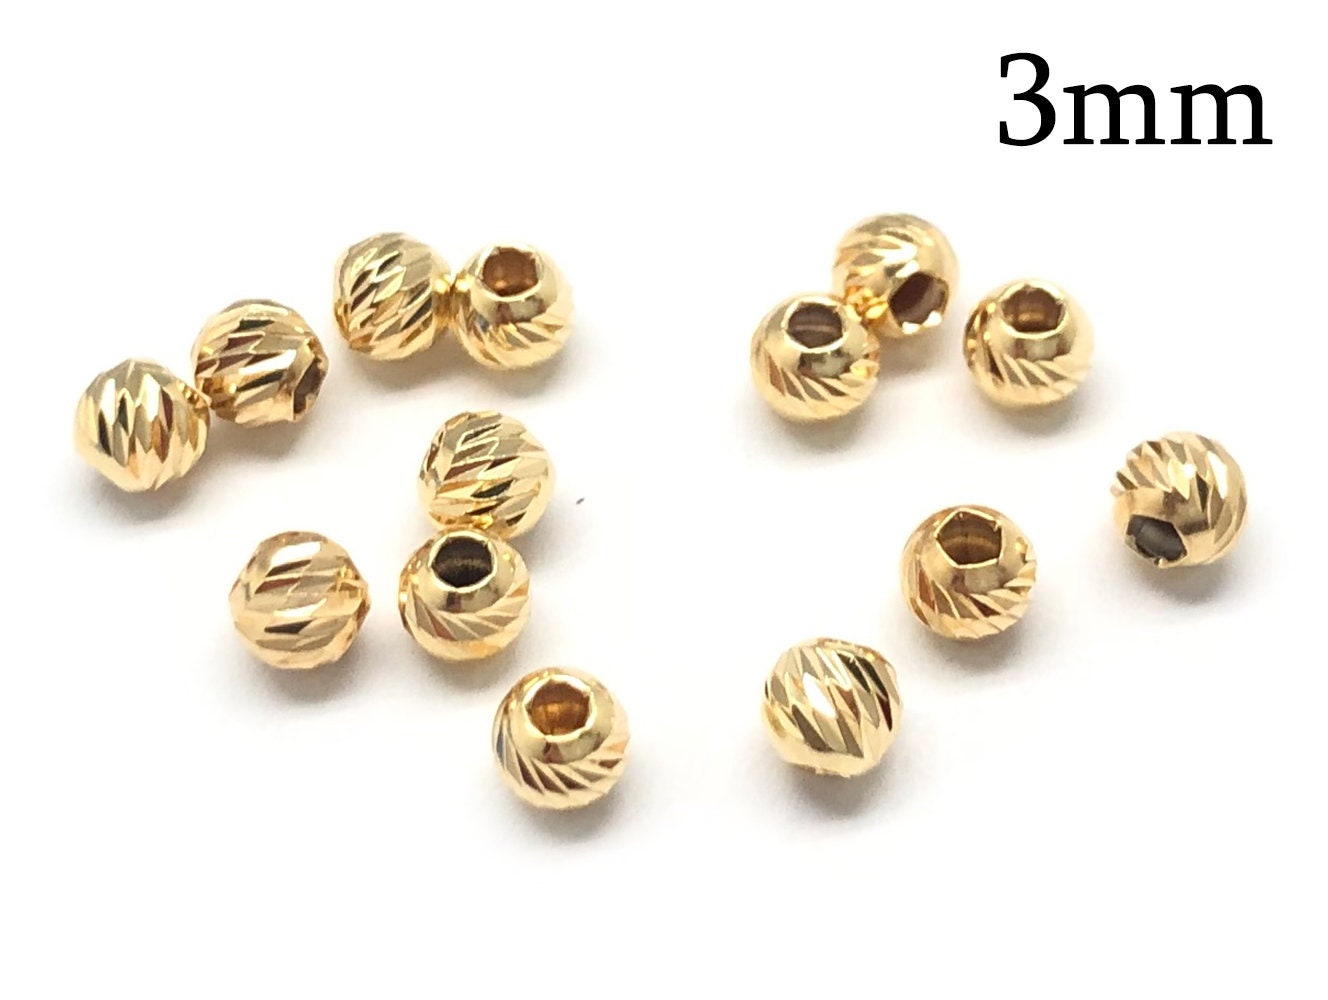 Brass Spacers Price Starting From Rs 2/Pc. Find Verified Sellers